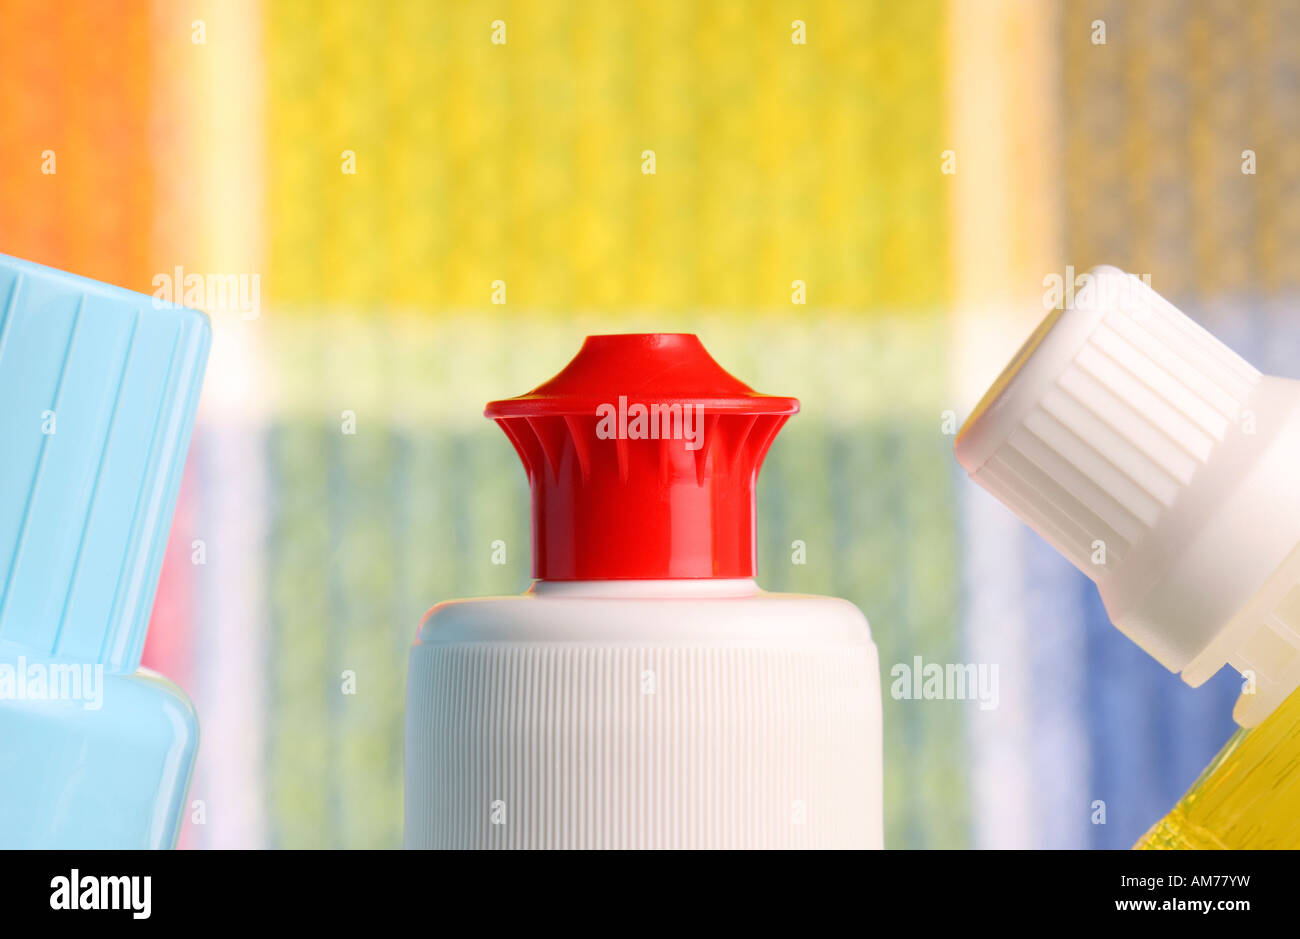 Cleaner, wipes, red closing cap Stock Photo